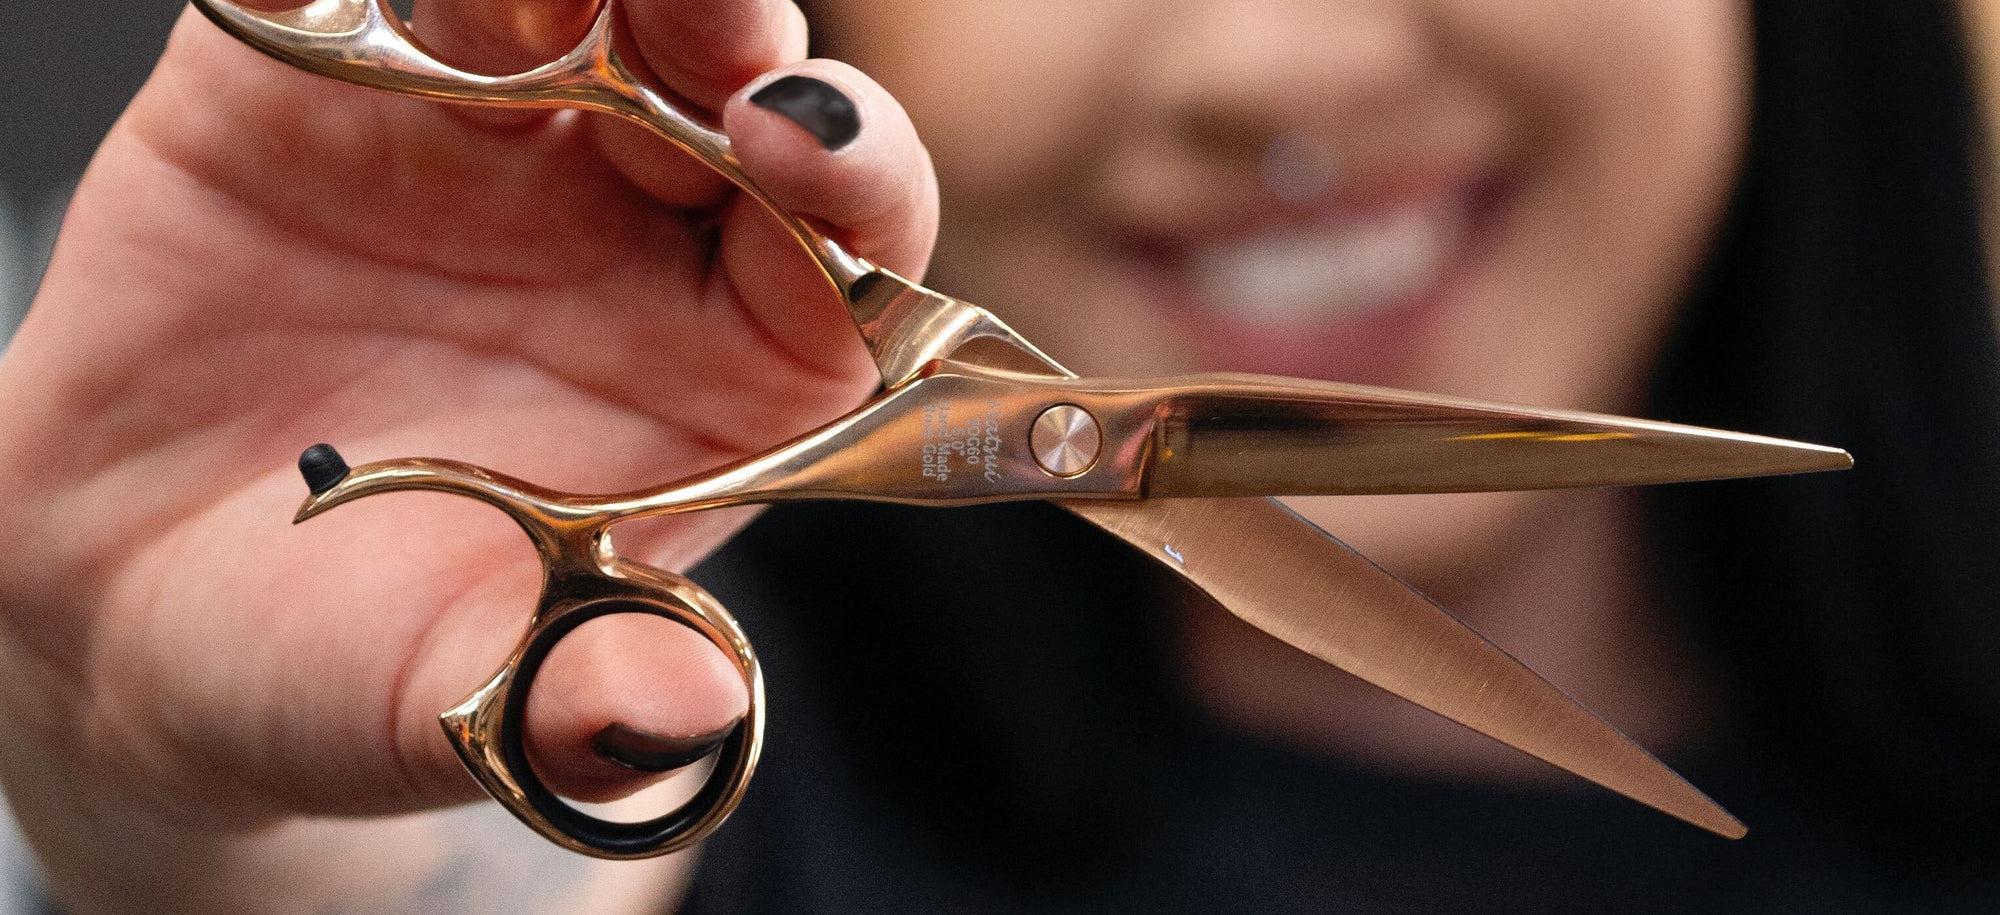 Why Ergonomic Shears Are A Must For Hairdressers